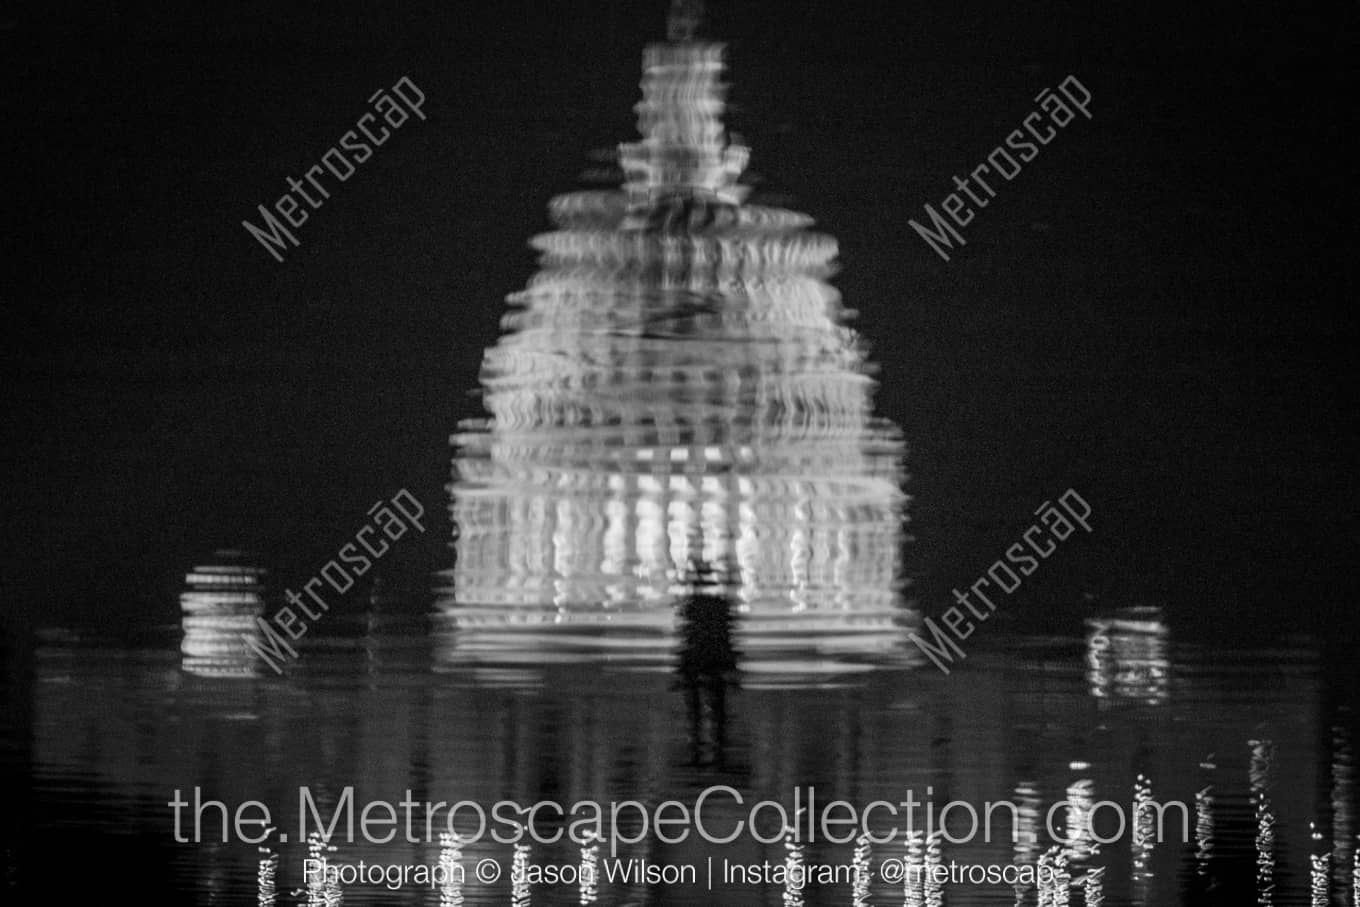 Washington DC District of Columbia Picture at Night